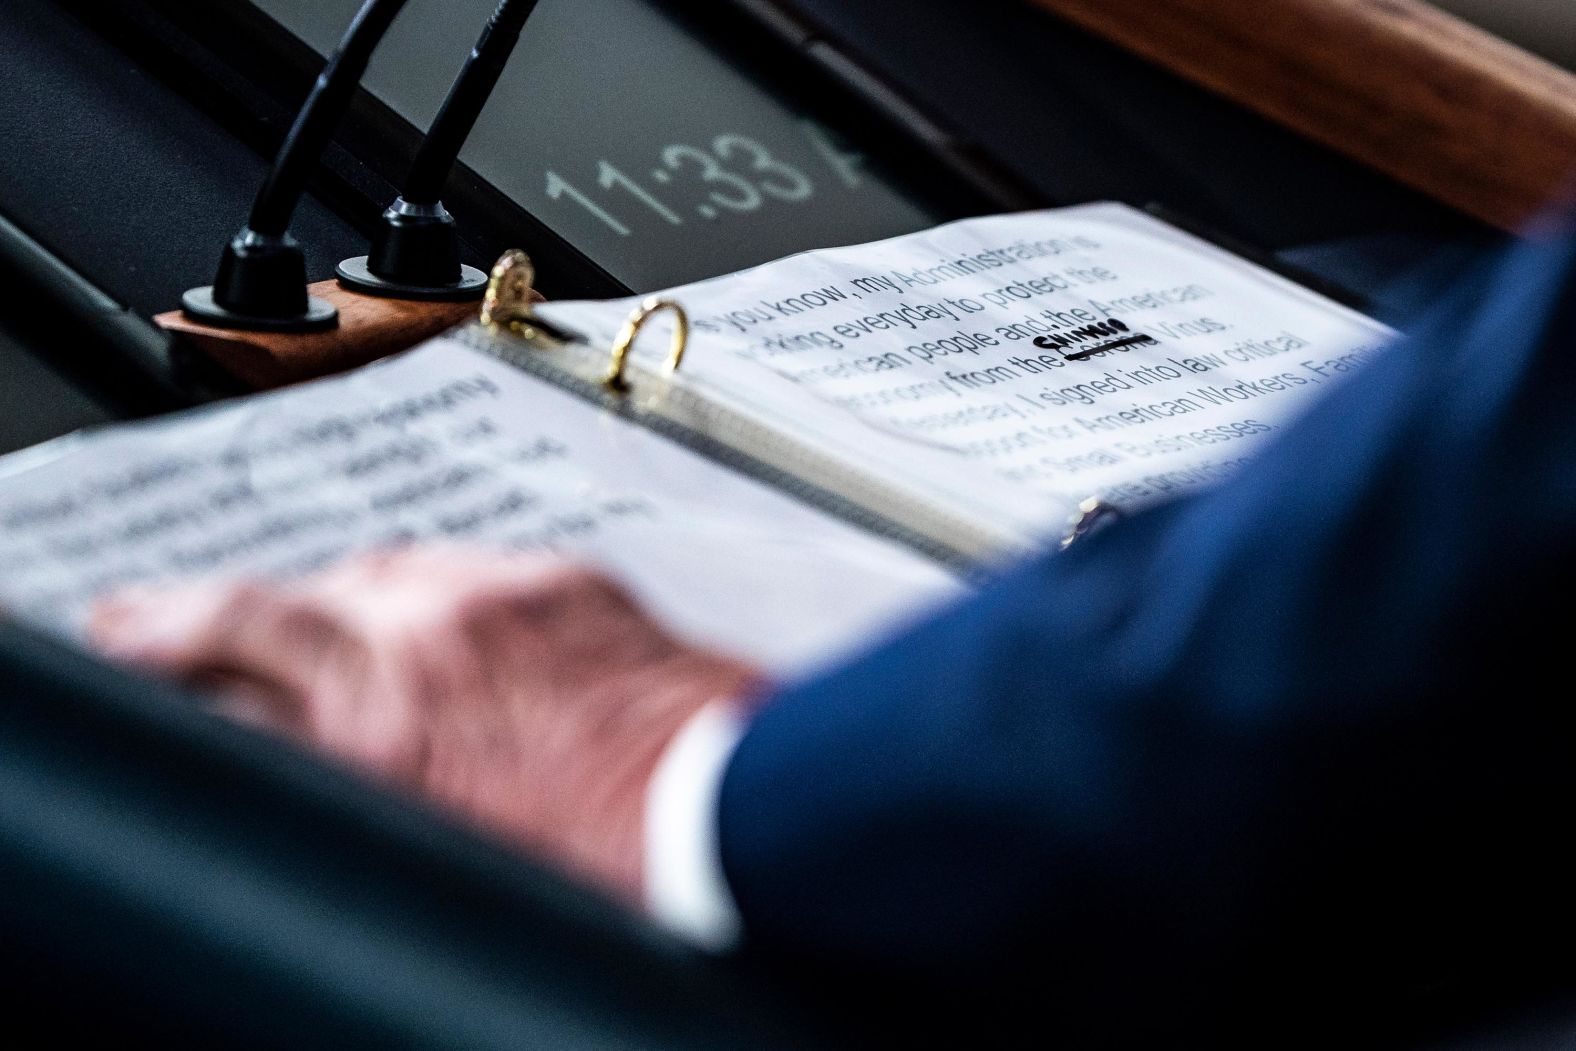 A close-up of Trump's notes shows where <a href="https://www.cnn.com/world/live-news/coronavirus-outbreak-03-19-20-intl-hnk/h_21c623966aa148dbeed242de4e94943e" target="_blank">the word "Corona" was crossed out and replaced with "Chinese"</a> as he speaks about the coronavirus at the White House on March 19. After consulting with medical experts and receiving guidance from the World Health Organization, CNN has determined that the term "Chinese virus" is inaccurate and considered stigmatizing.